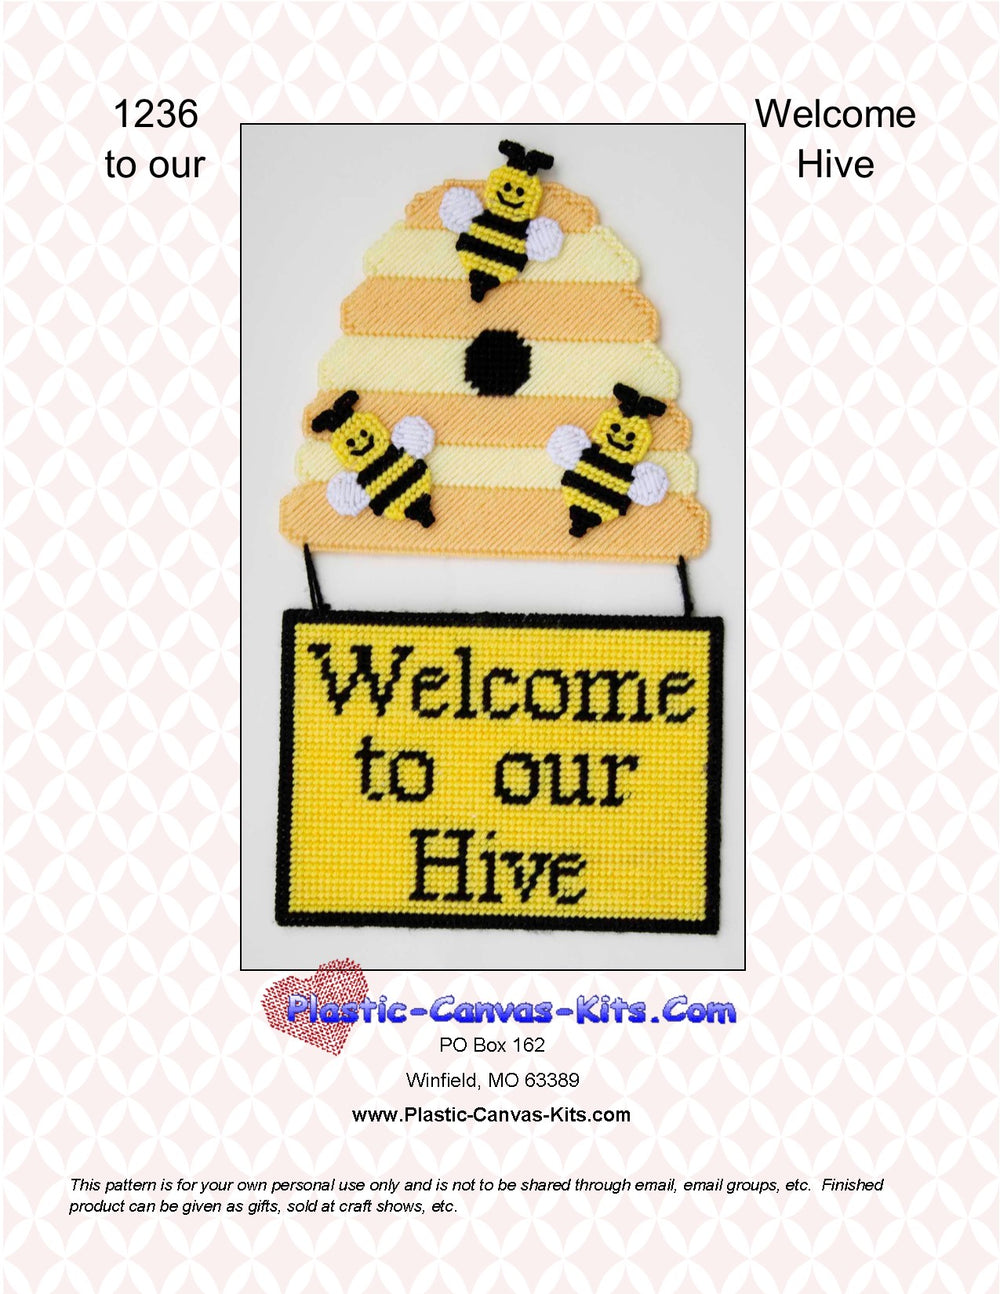 Welcome to Our Hive